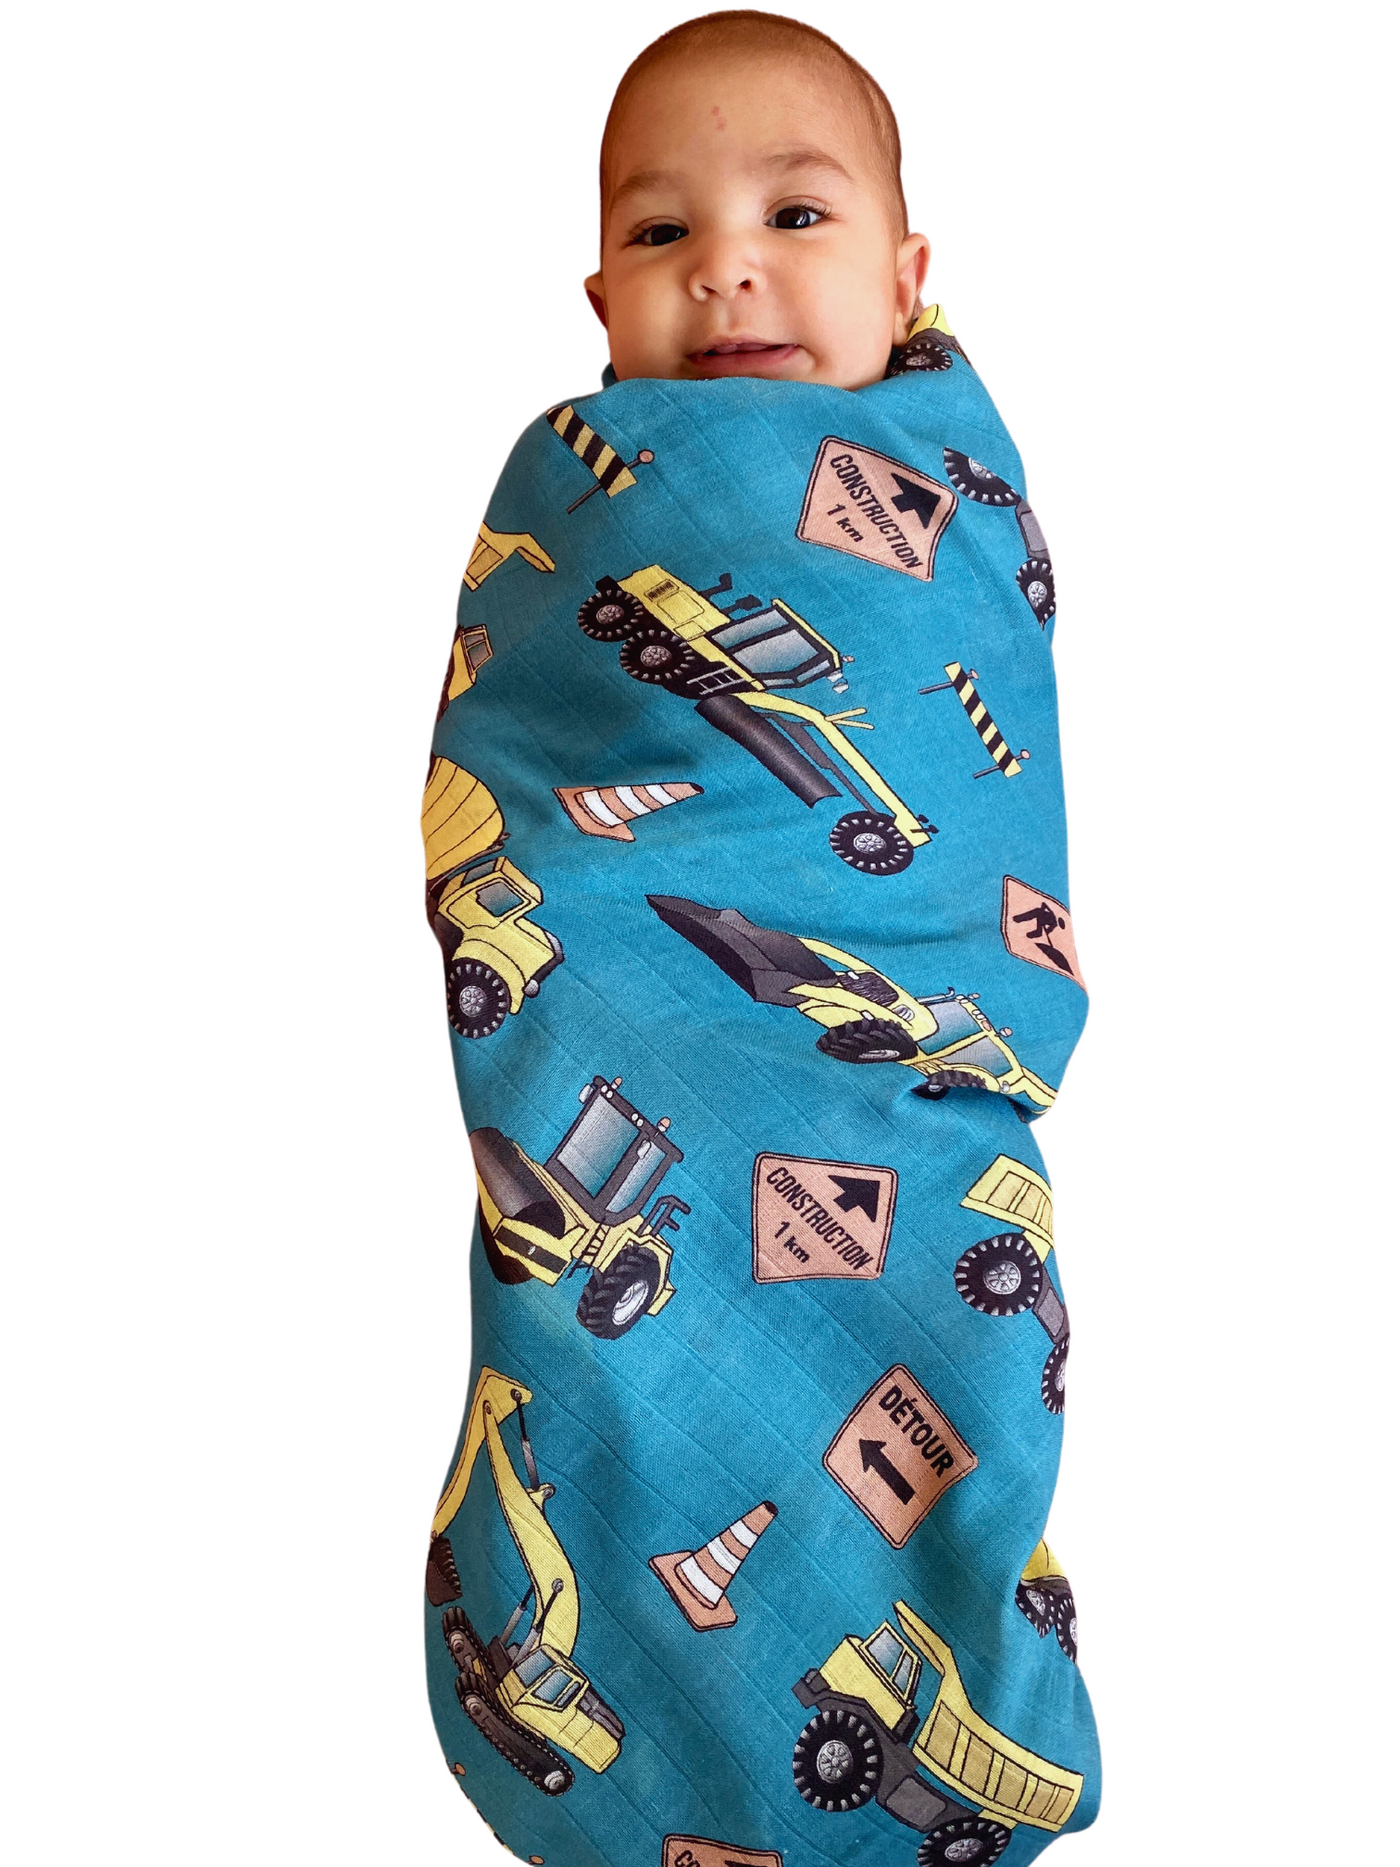 Muslin Swaddle: Construction Trucks (Teal Background)